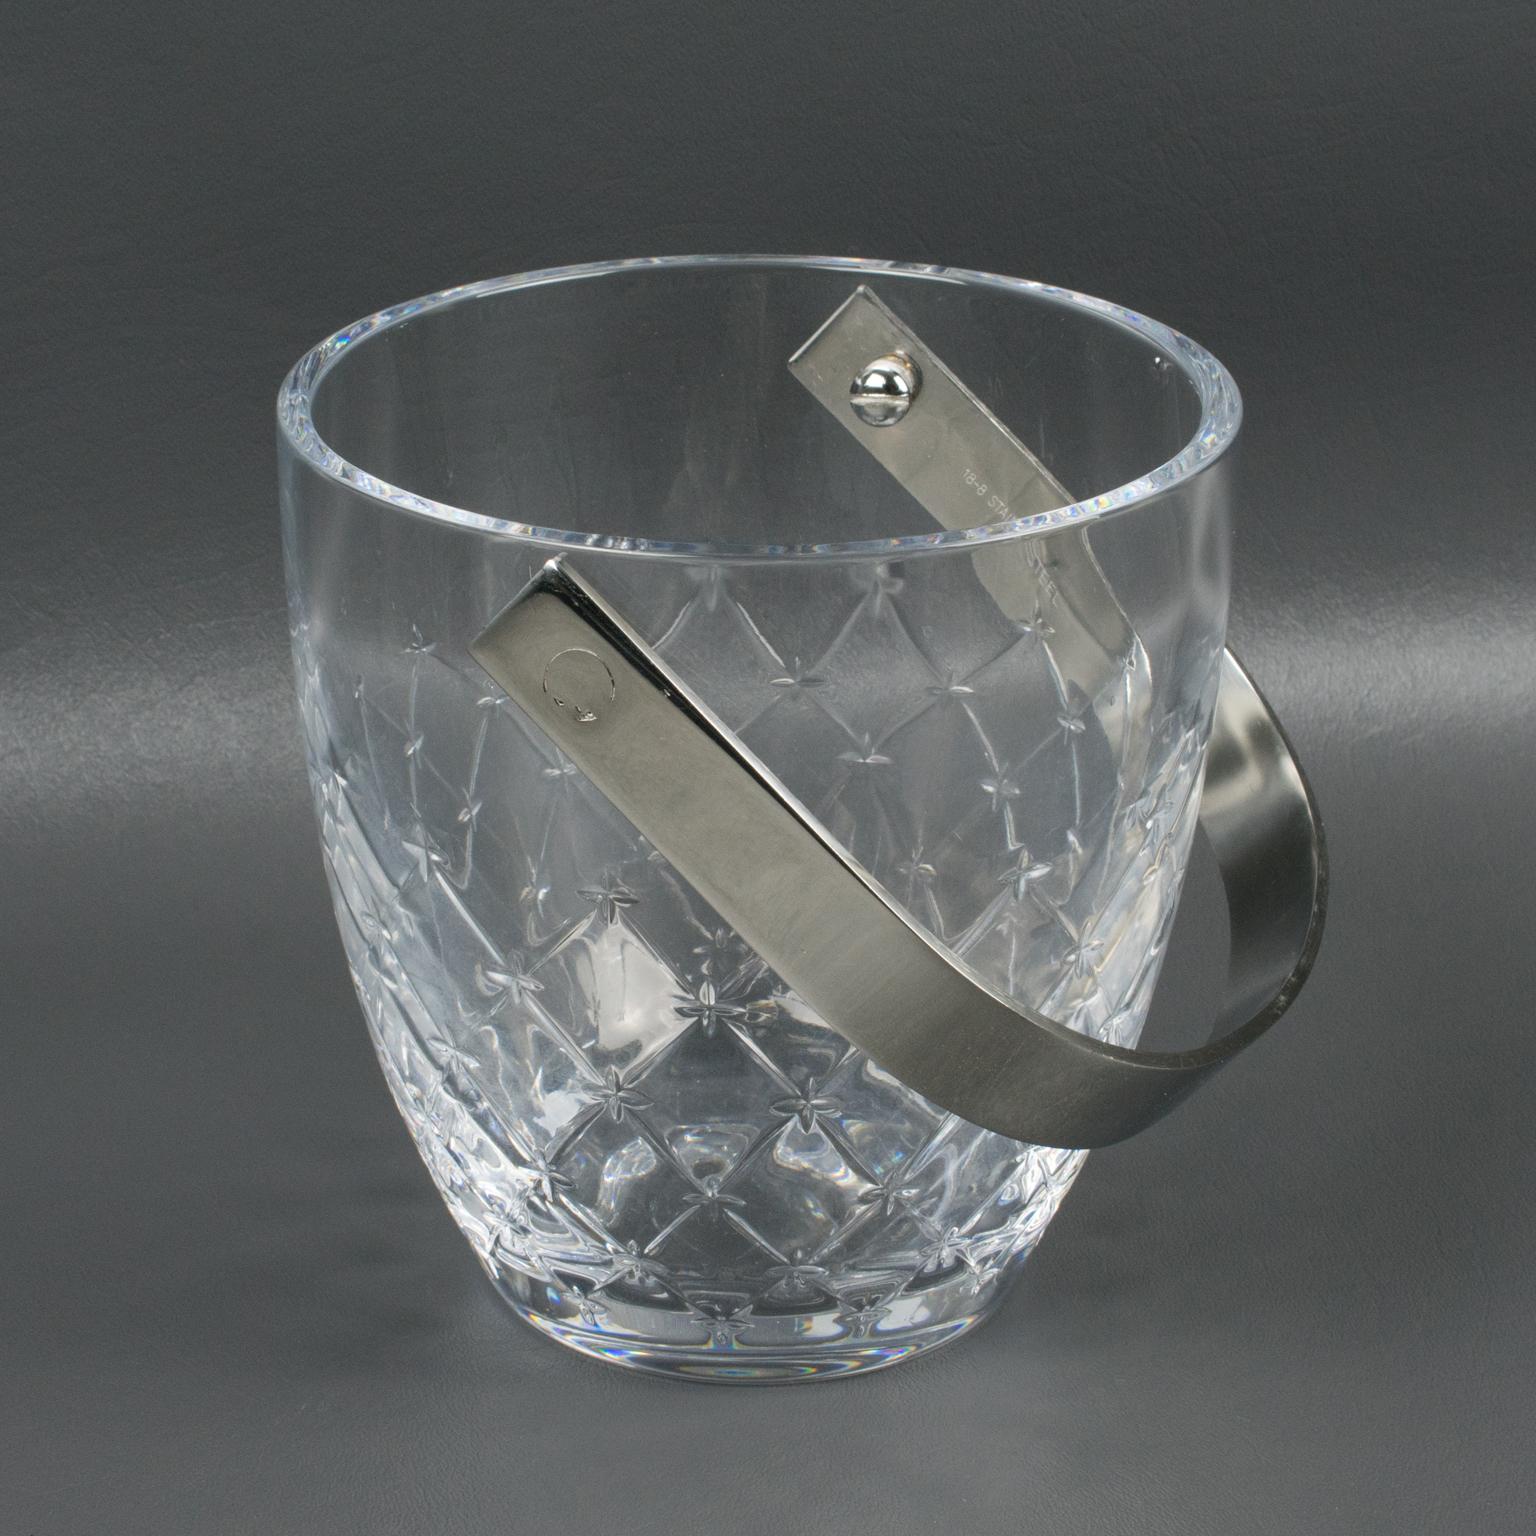 Late 20th Century Christian Dior Ice Bucket Cooler Etched Crystal and Stainless Steel